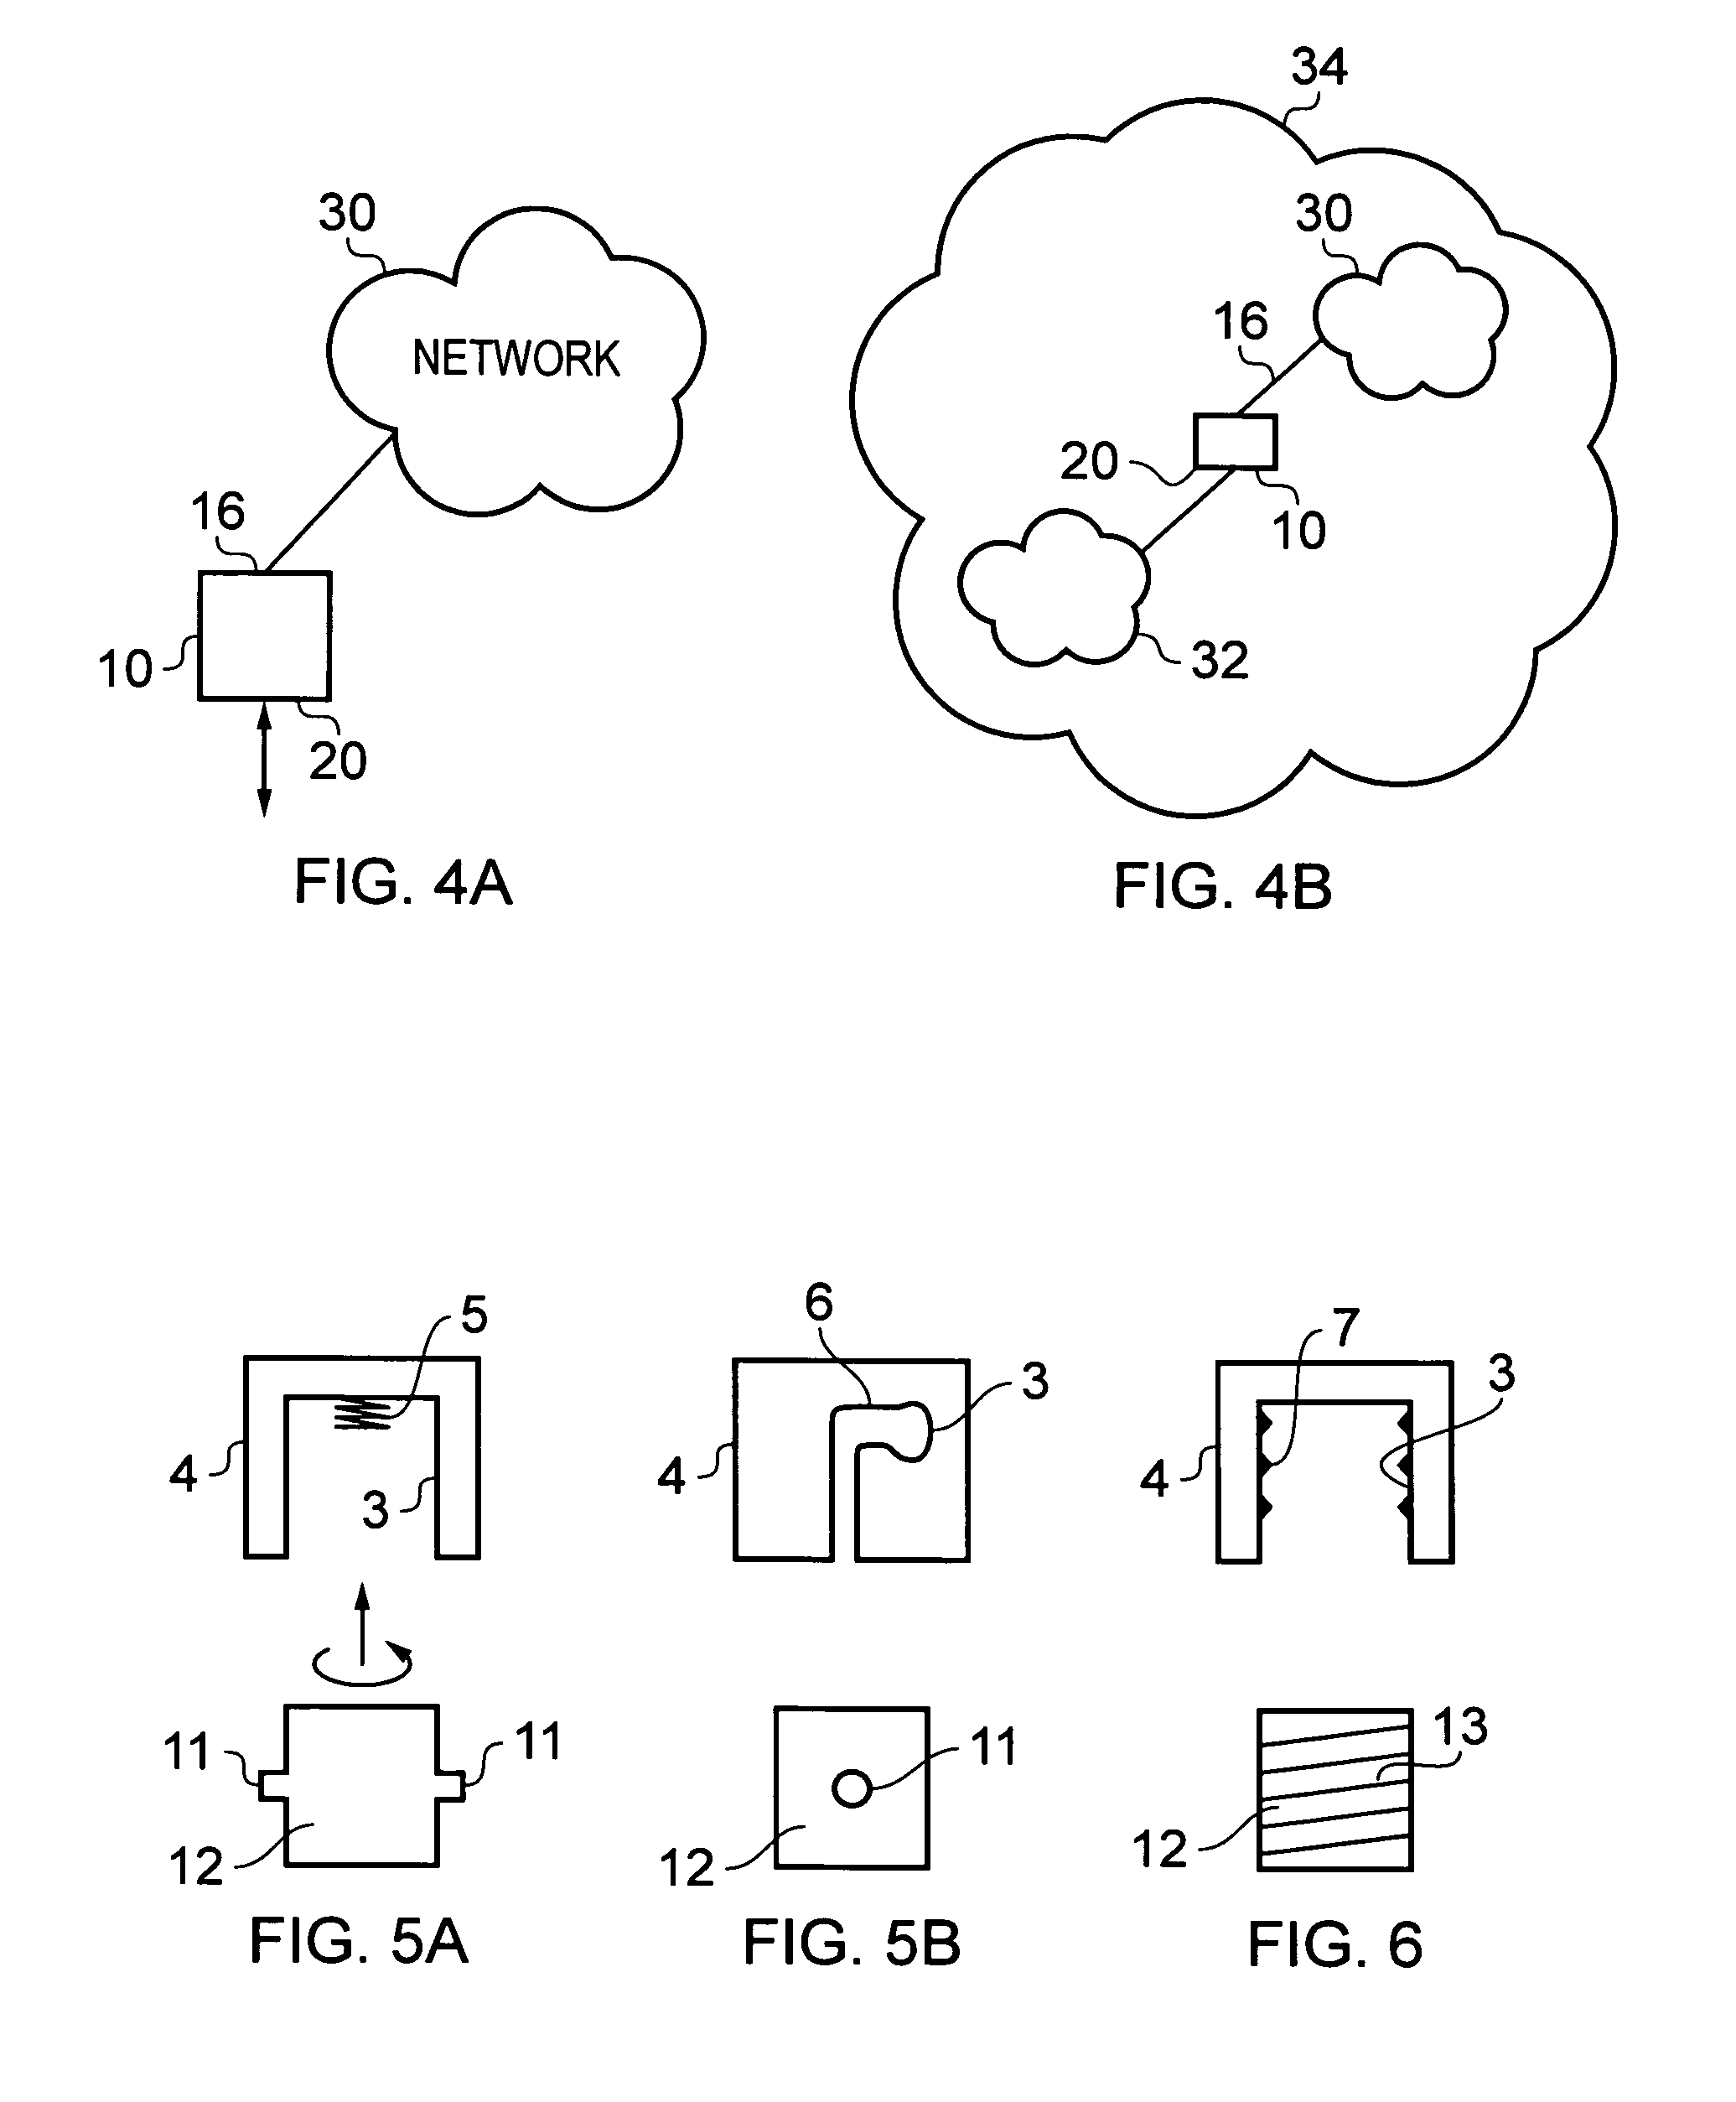 Light fitting apparatus interfacing with a data communications network